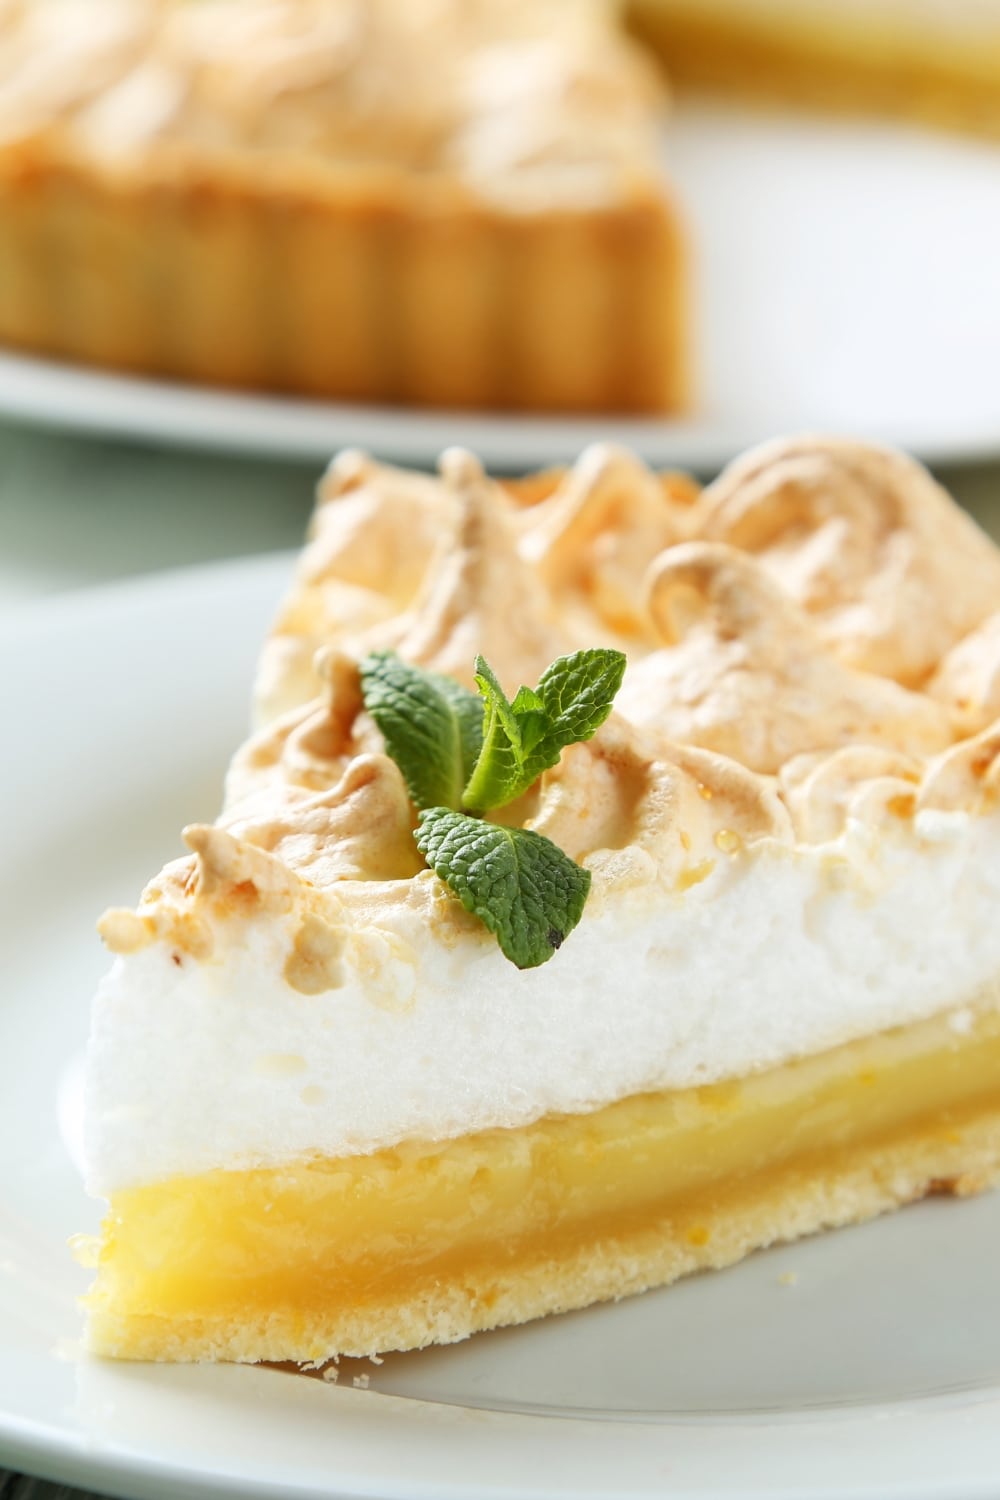 A Sliced of Layered No-Bake Lemon Pie with Meringue Served on a White Plate, Garnished With Fresh  Basil Leaves